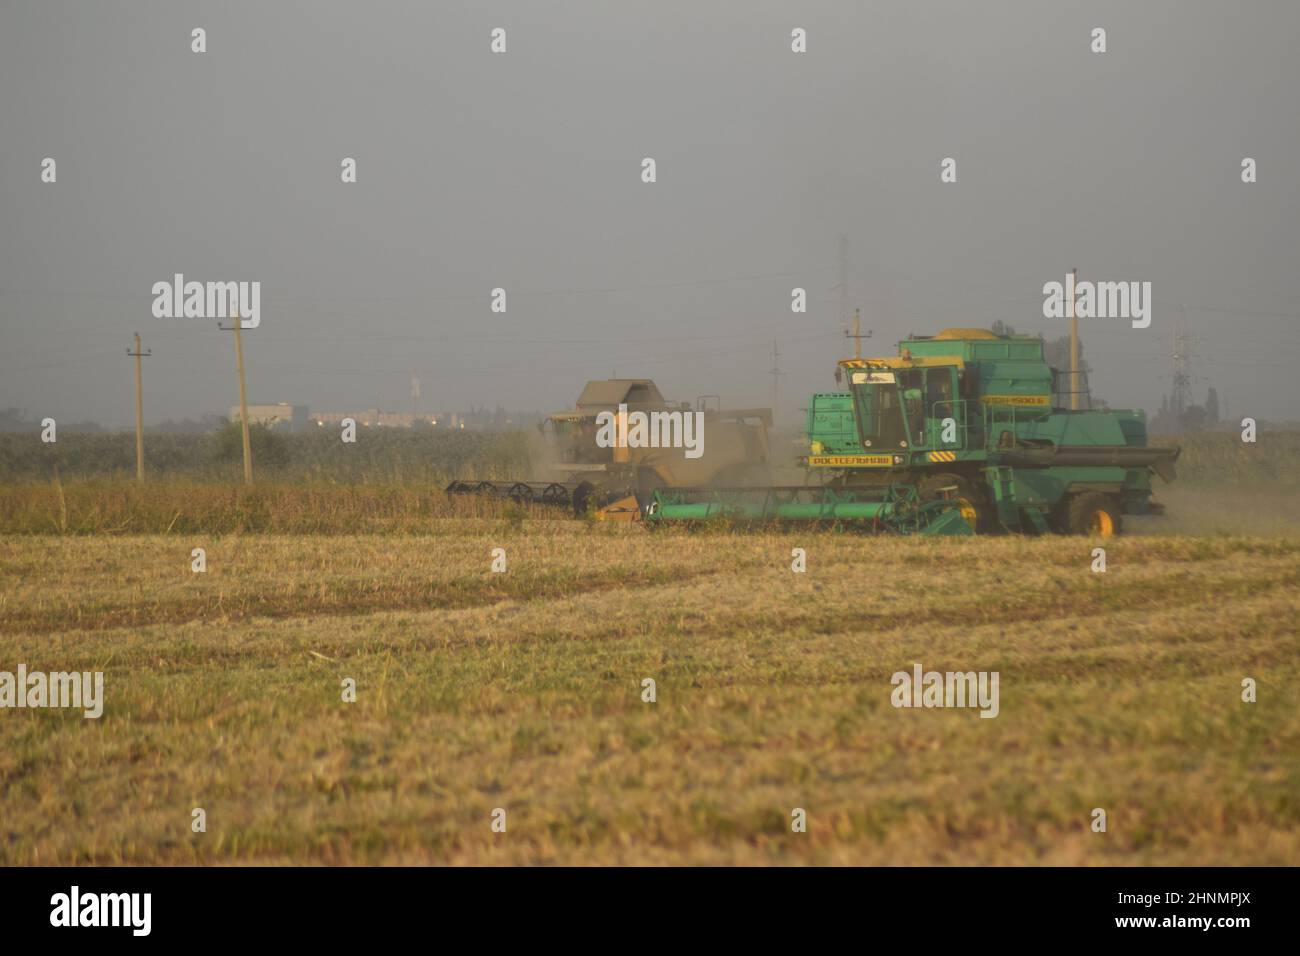 Soy harvesting by combines in the field. Stock Photo